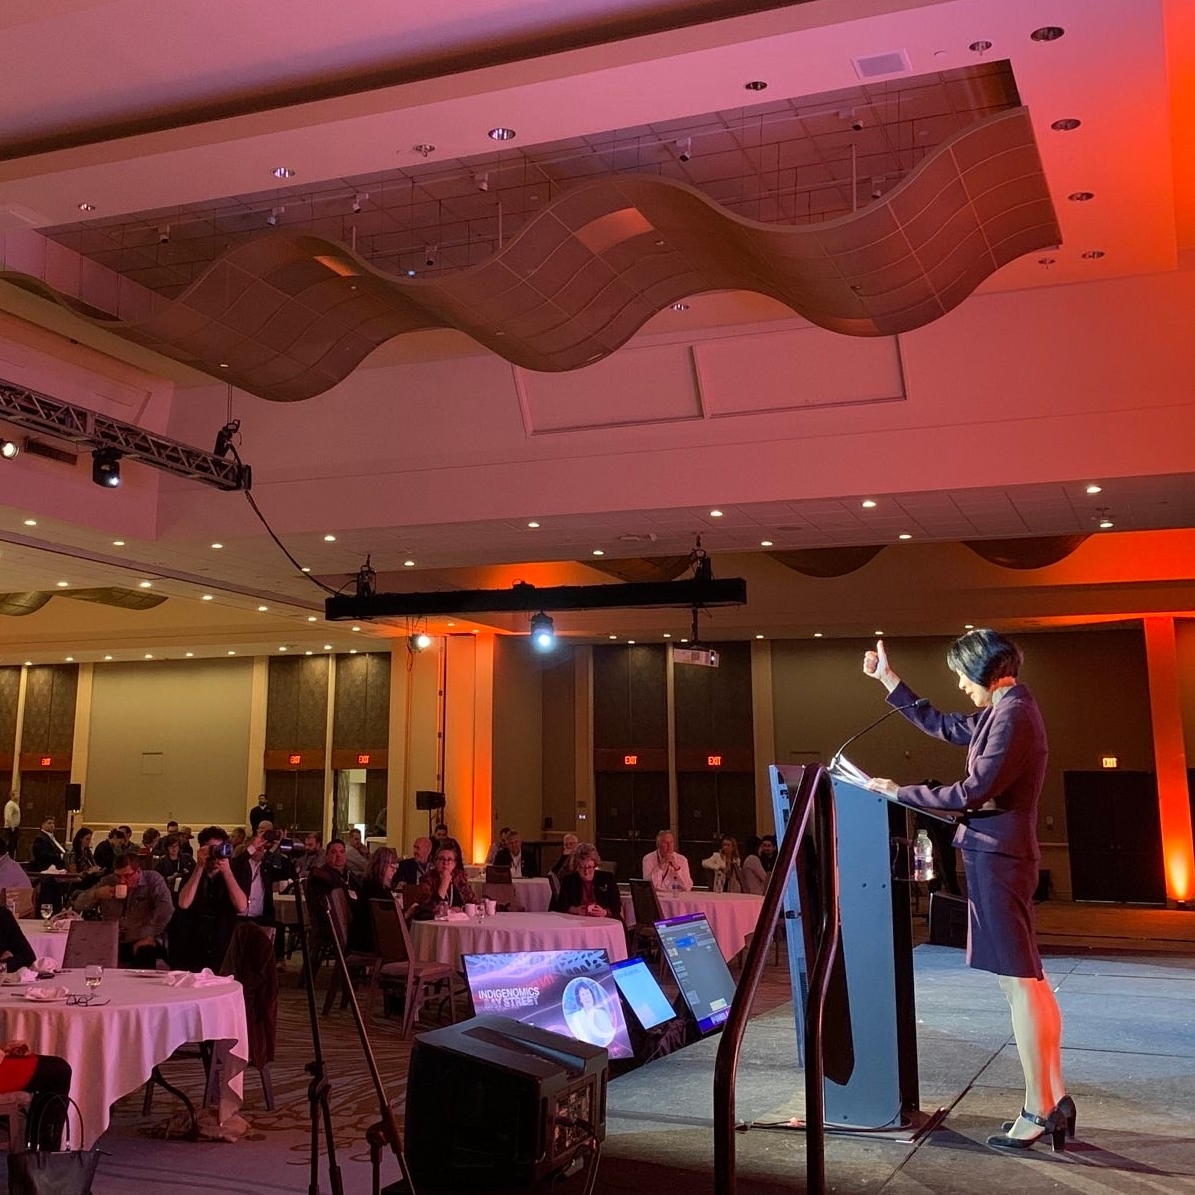 This week, it was an honour to speak to the Indigenomics Institute.

Reconciliation is an economic issue – when we grow Indigenous opportunity, we grow Indigenous power. 

And the City of Toronto is committed to investing in Indigenous economic power.